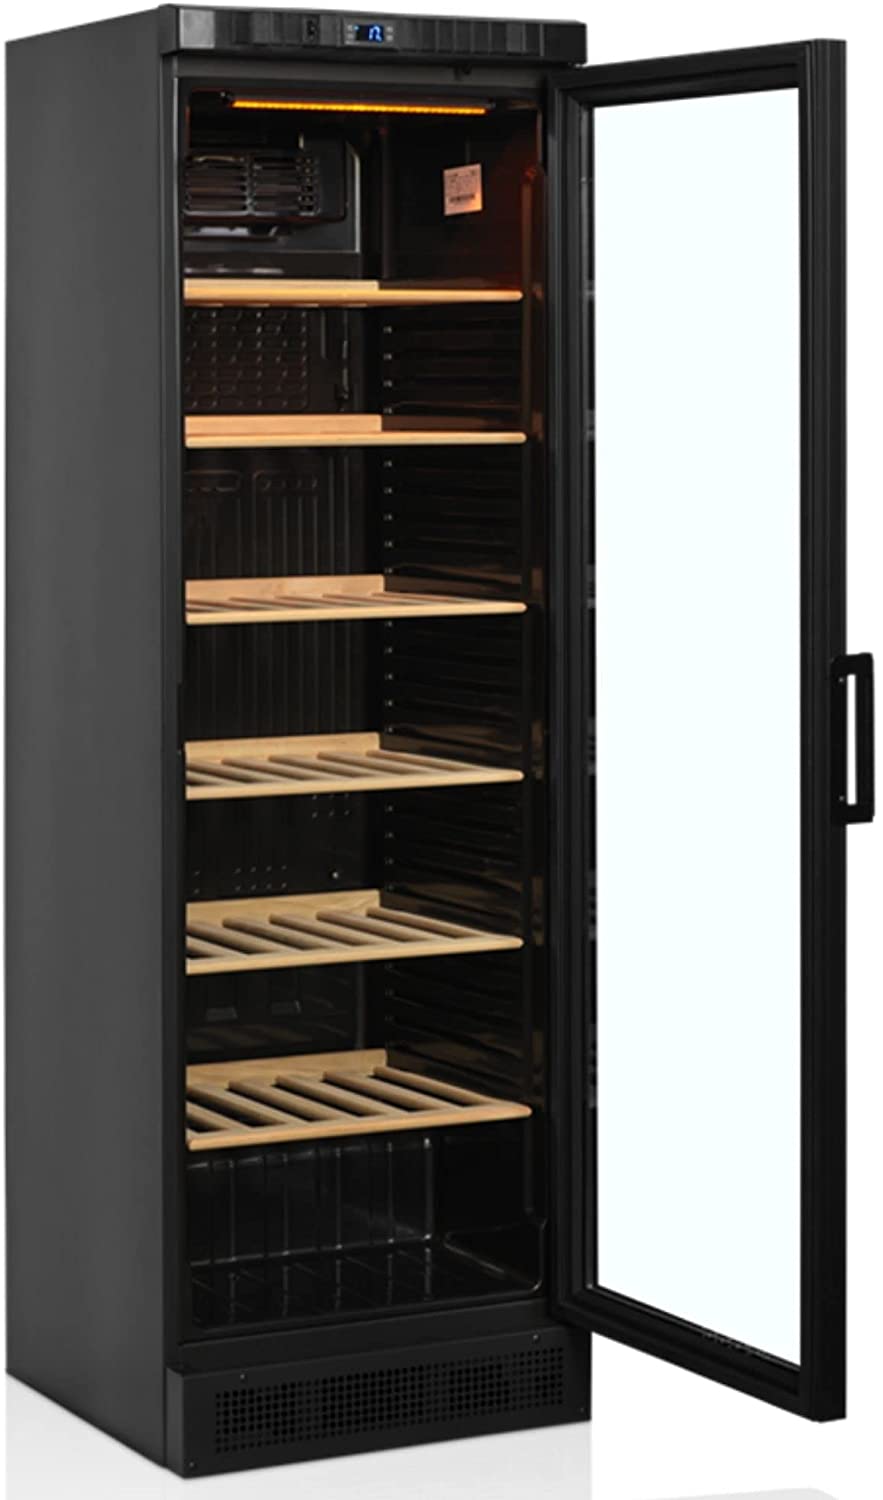 Tefcold CPV1380E Wine Cooler, Black, Wine Refrigerator with Temperature Range 1 to 18 °C, LED Lighting, 118 Bottles